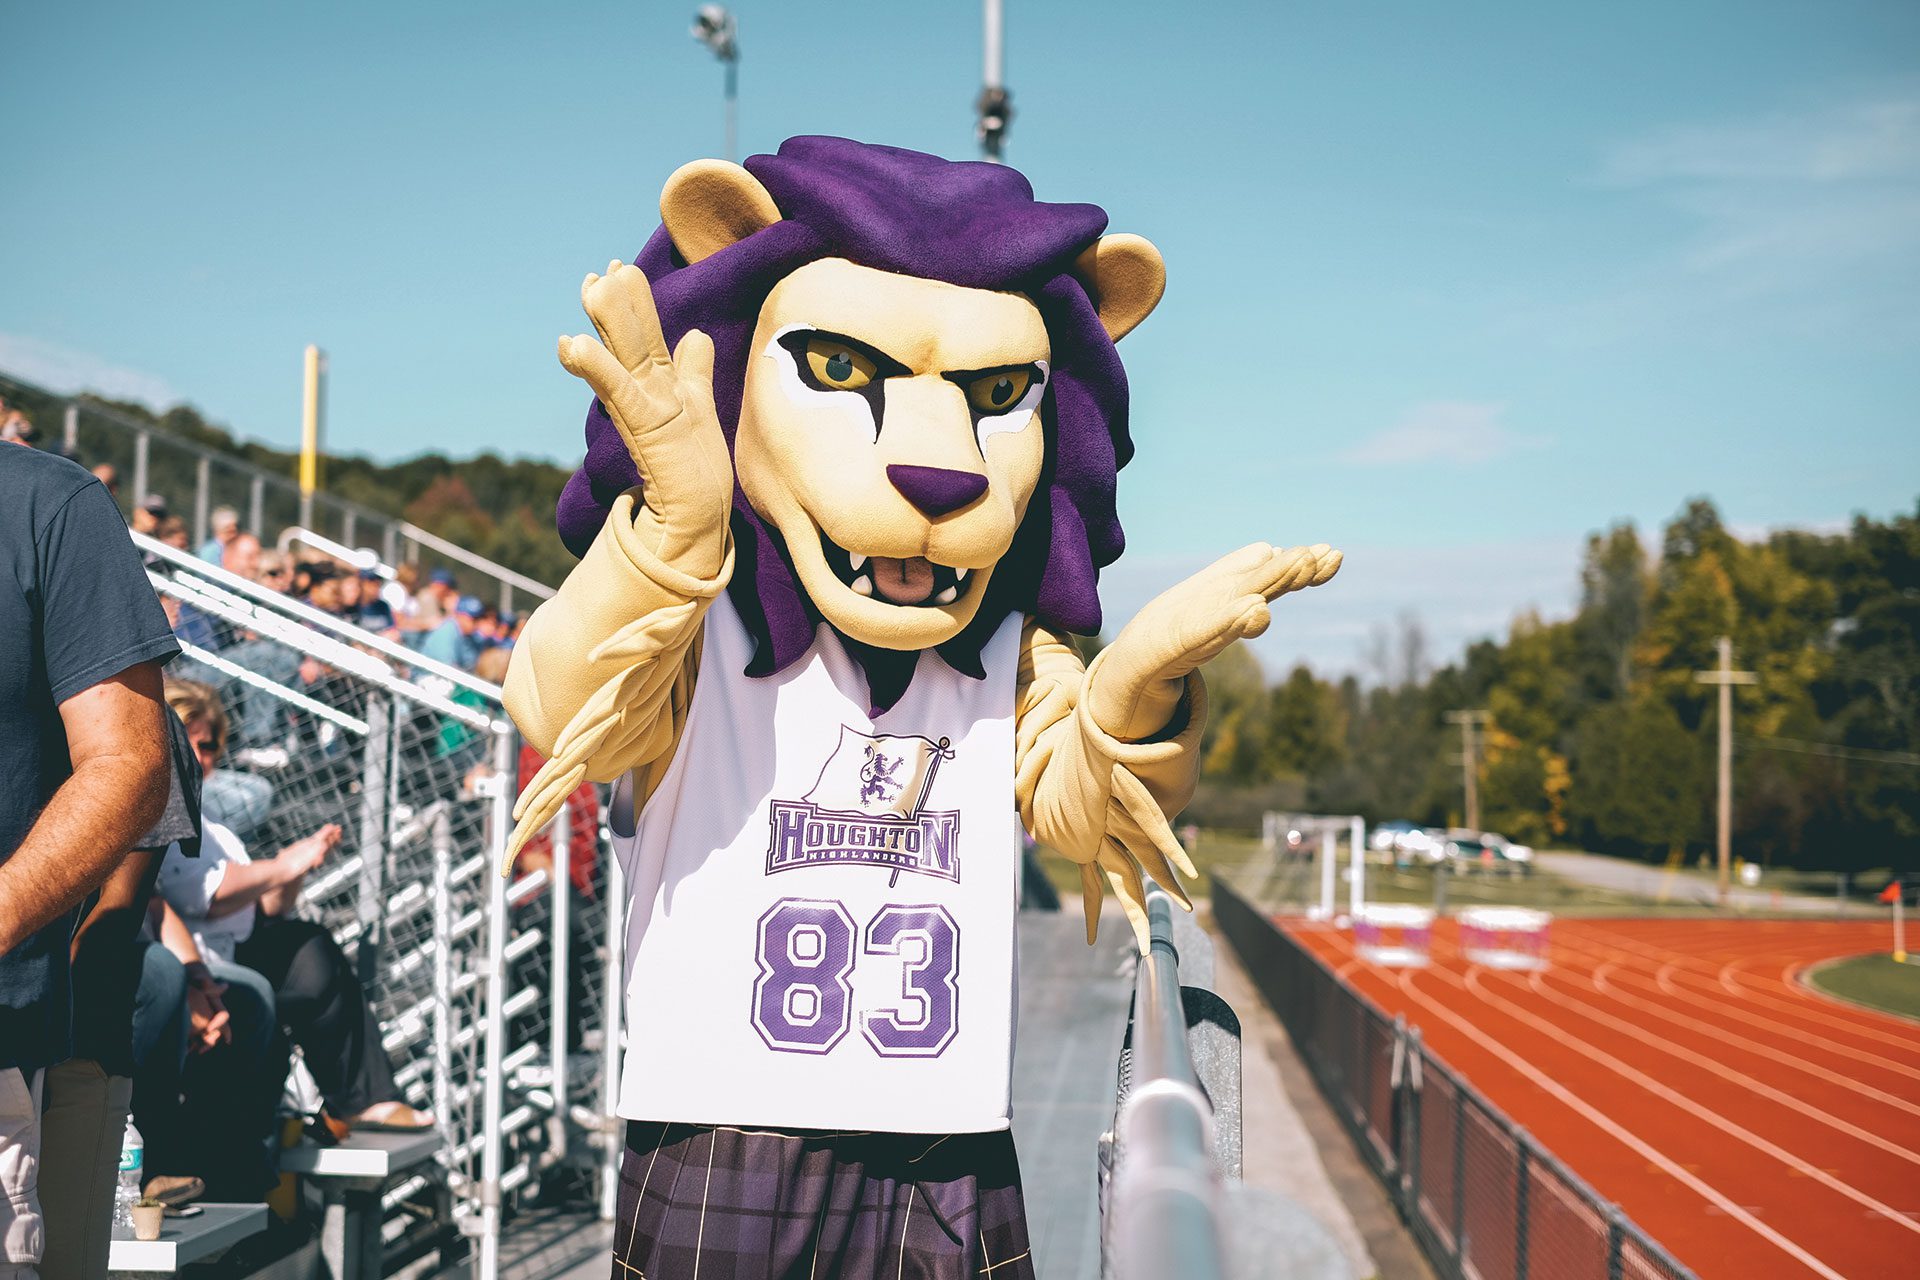 Luckey lion mascot raising hands in celebration on outdoor track.